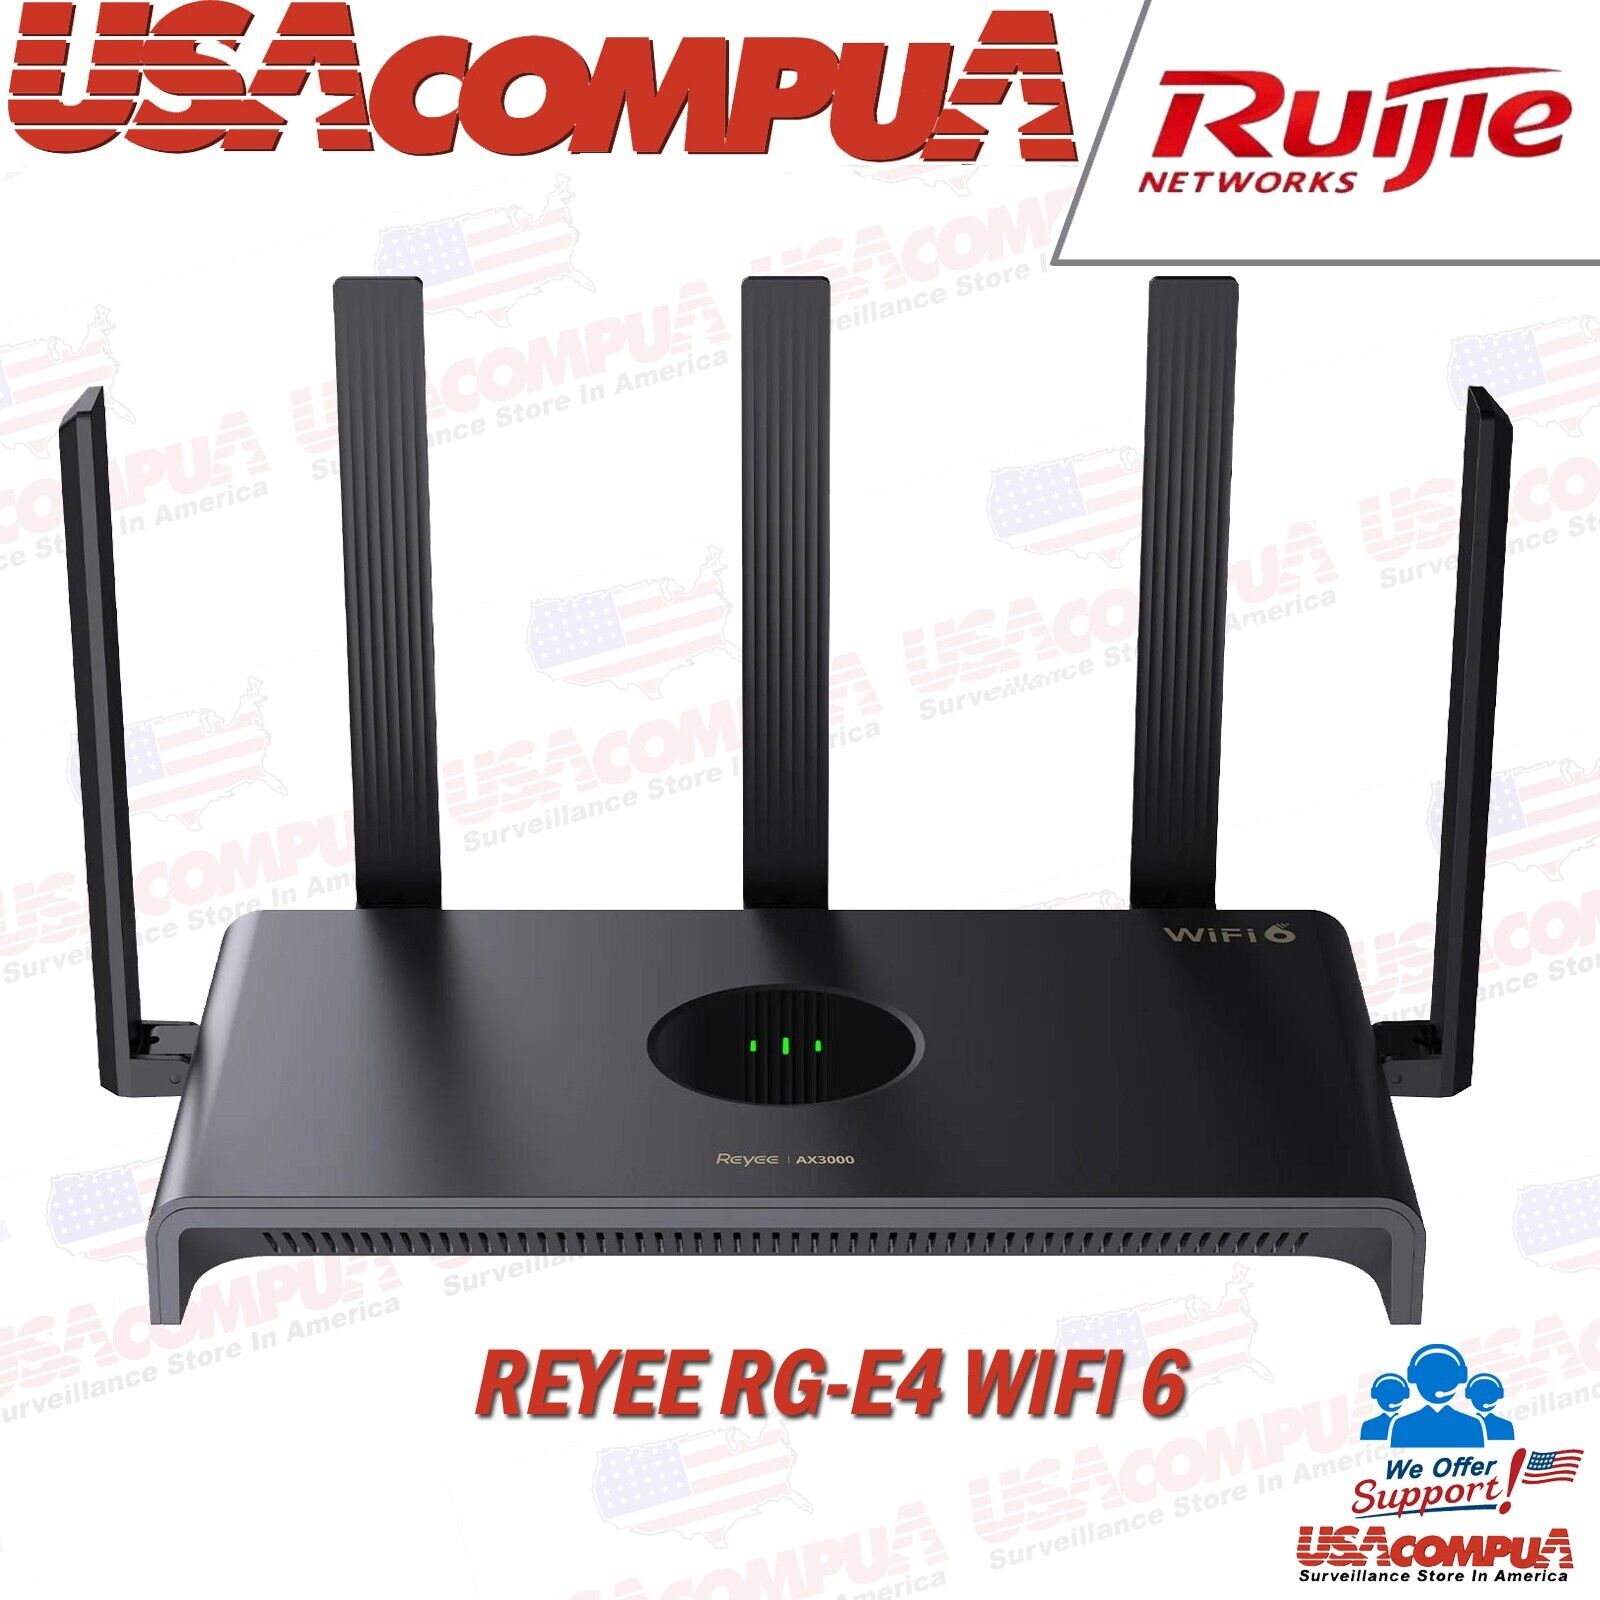 Reyee AX3000 WiFi 6 Router E4 AX3000 Dual-Band Gaming Router Signal Boosting